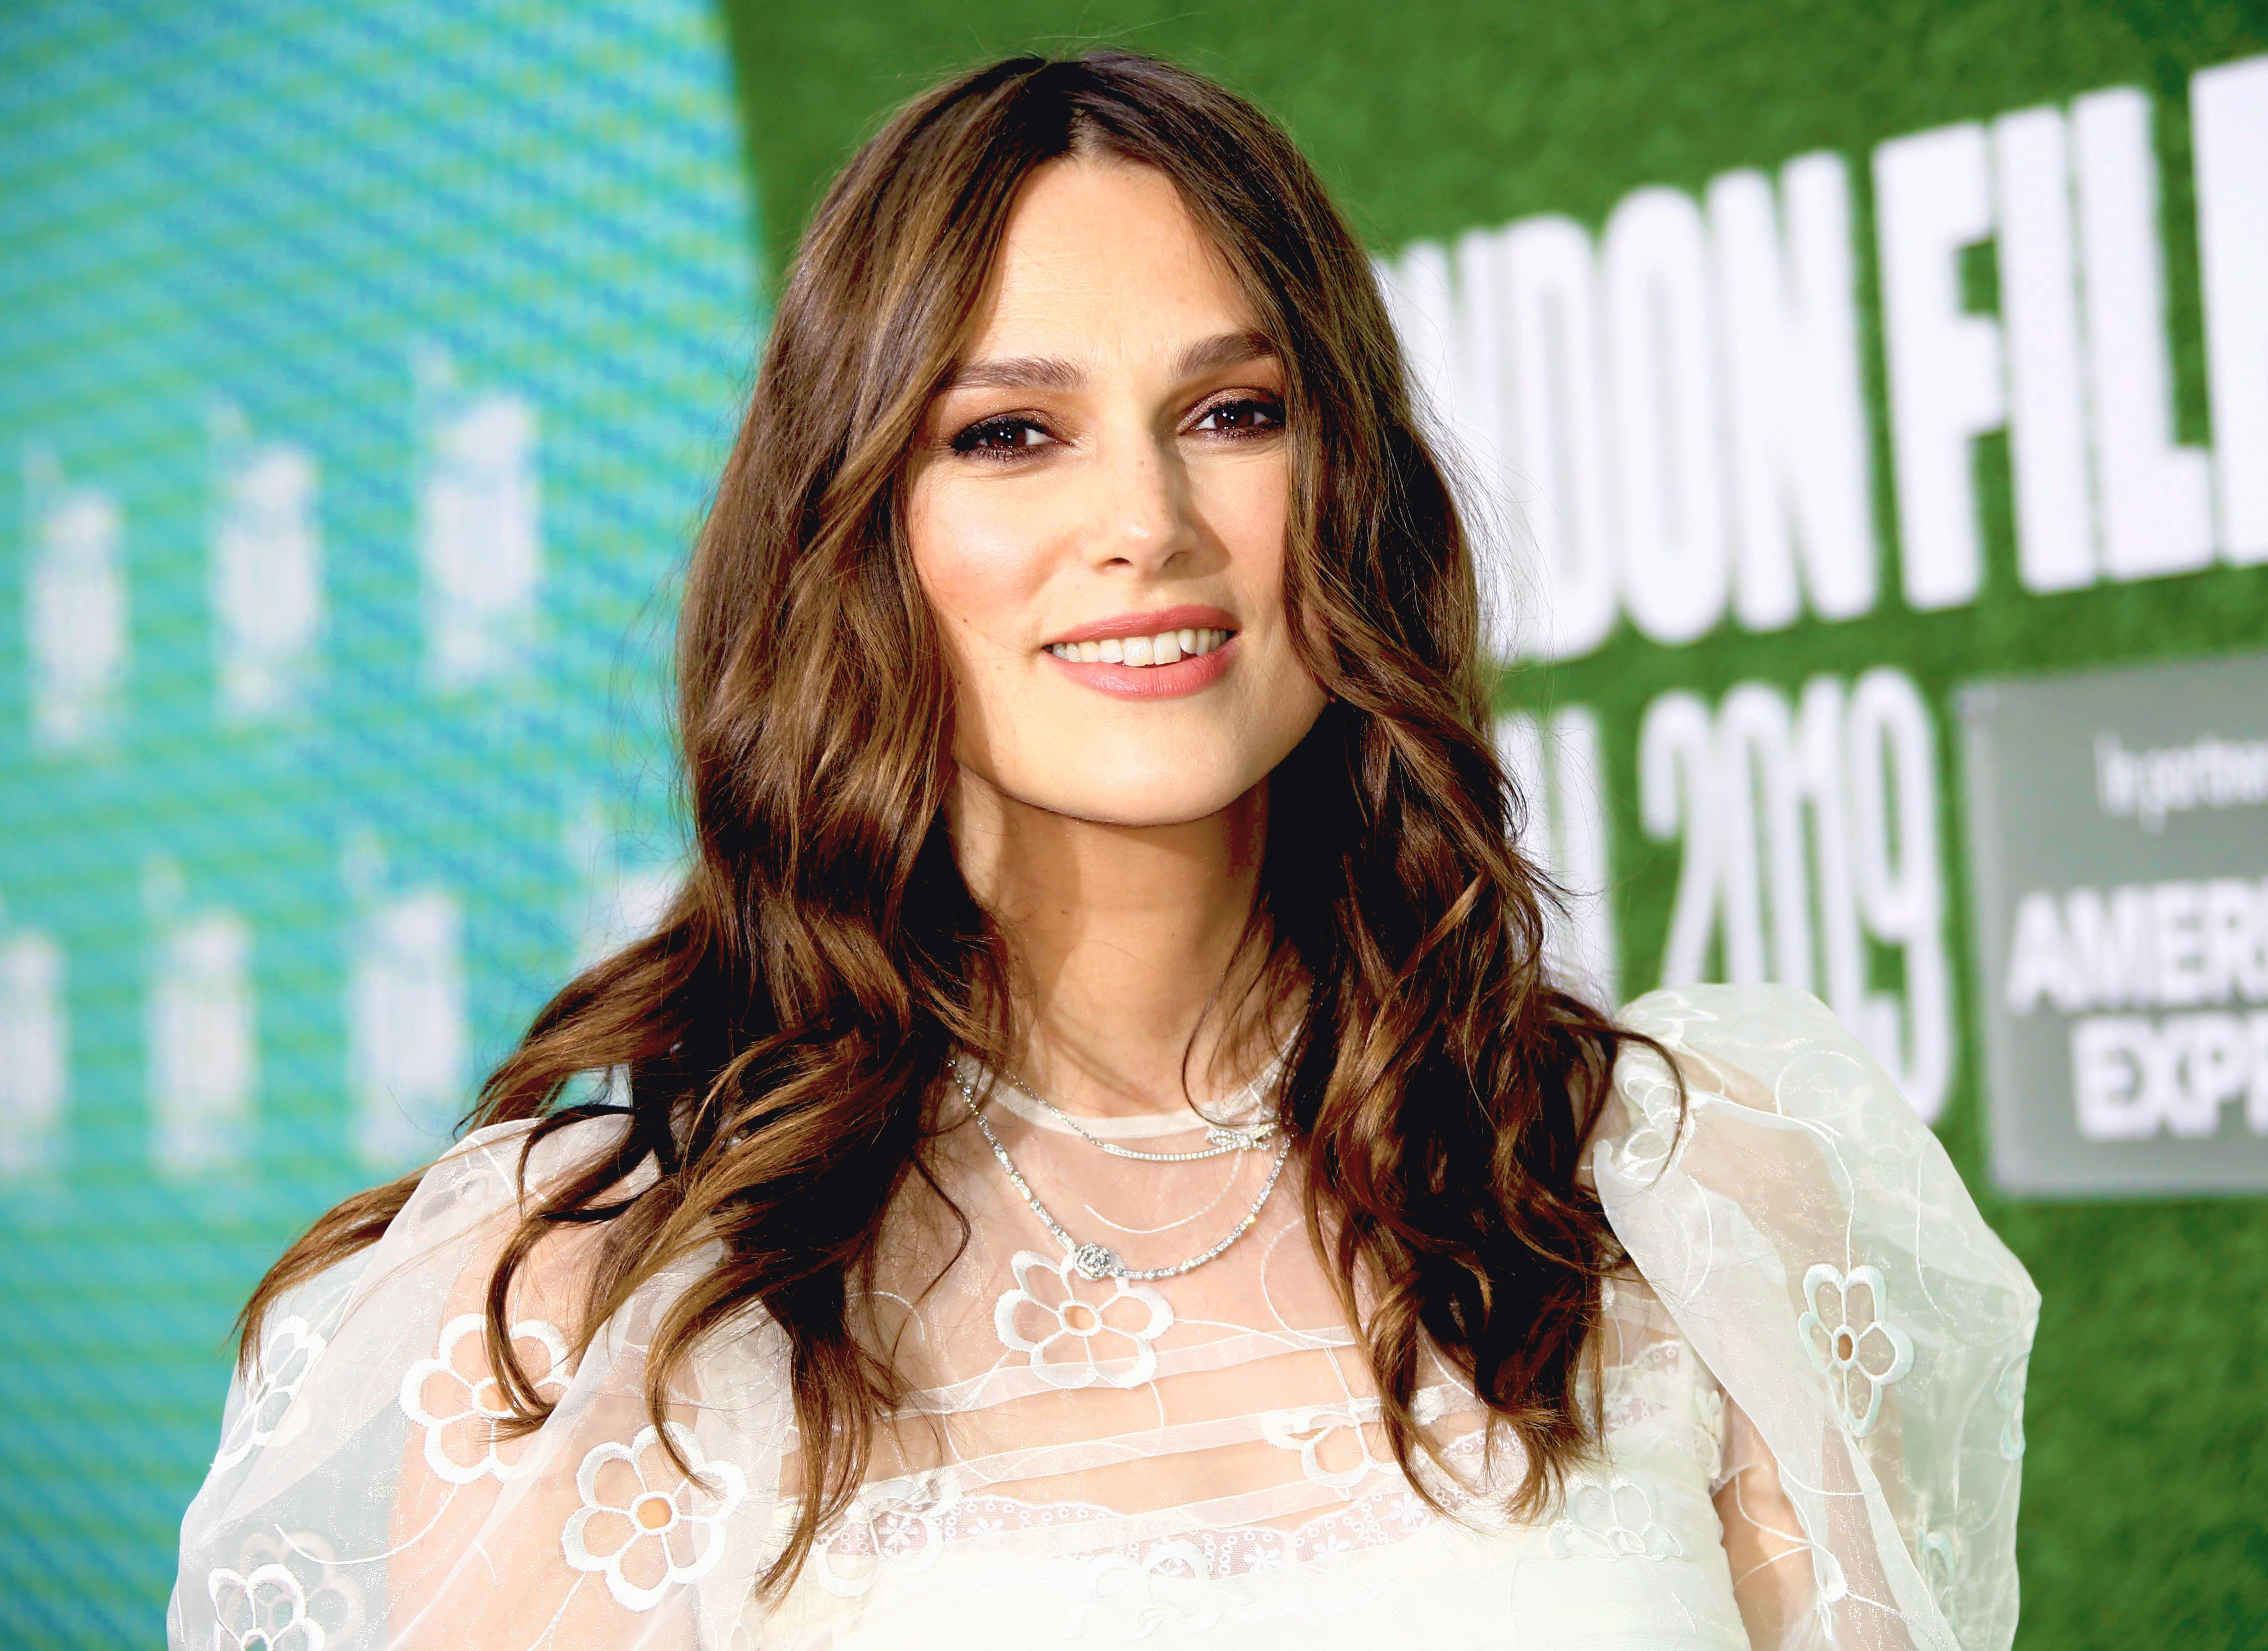 Keira Knightley Hardcore Porn - Keira Knightley Refuses to Do Nude Scenes After Welcoming 2 Kids